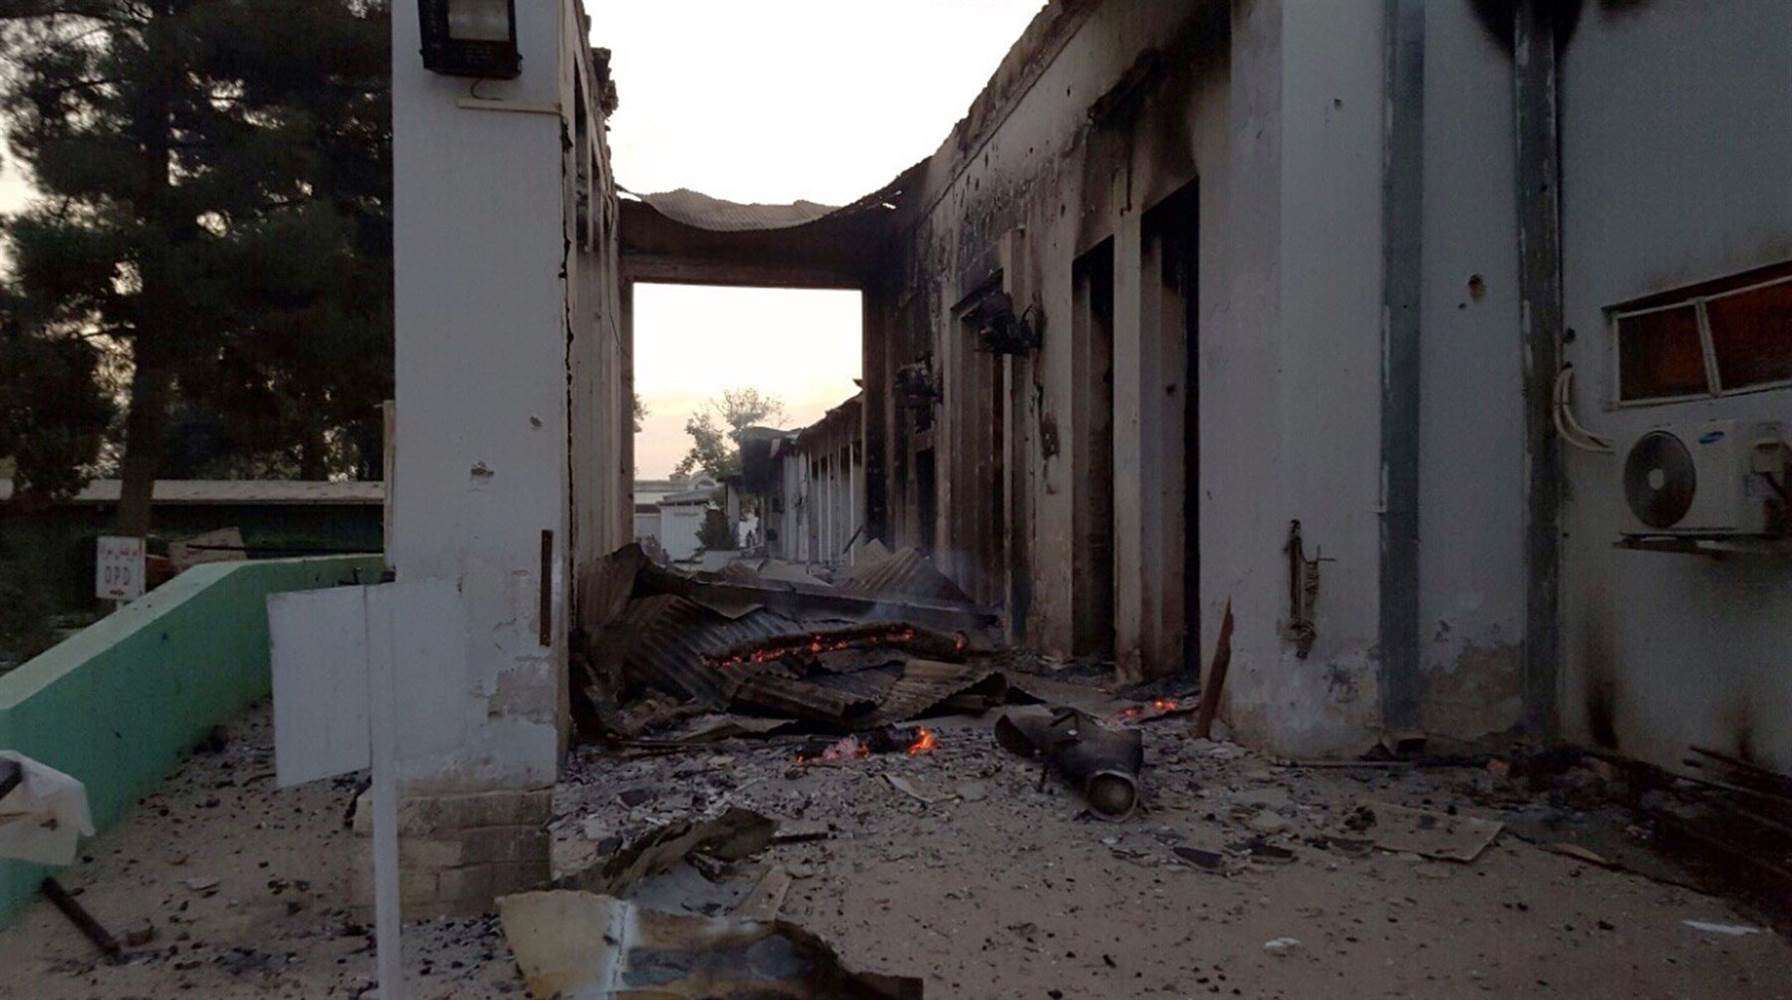     Fires burn in part of the hospital run by Doctors Without Borders (MSF) in the Afghan city of Kunduz after it was hit by an air strike.